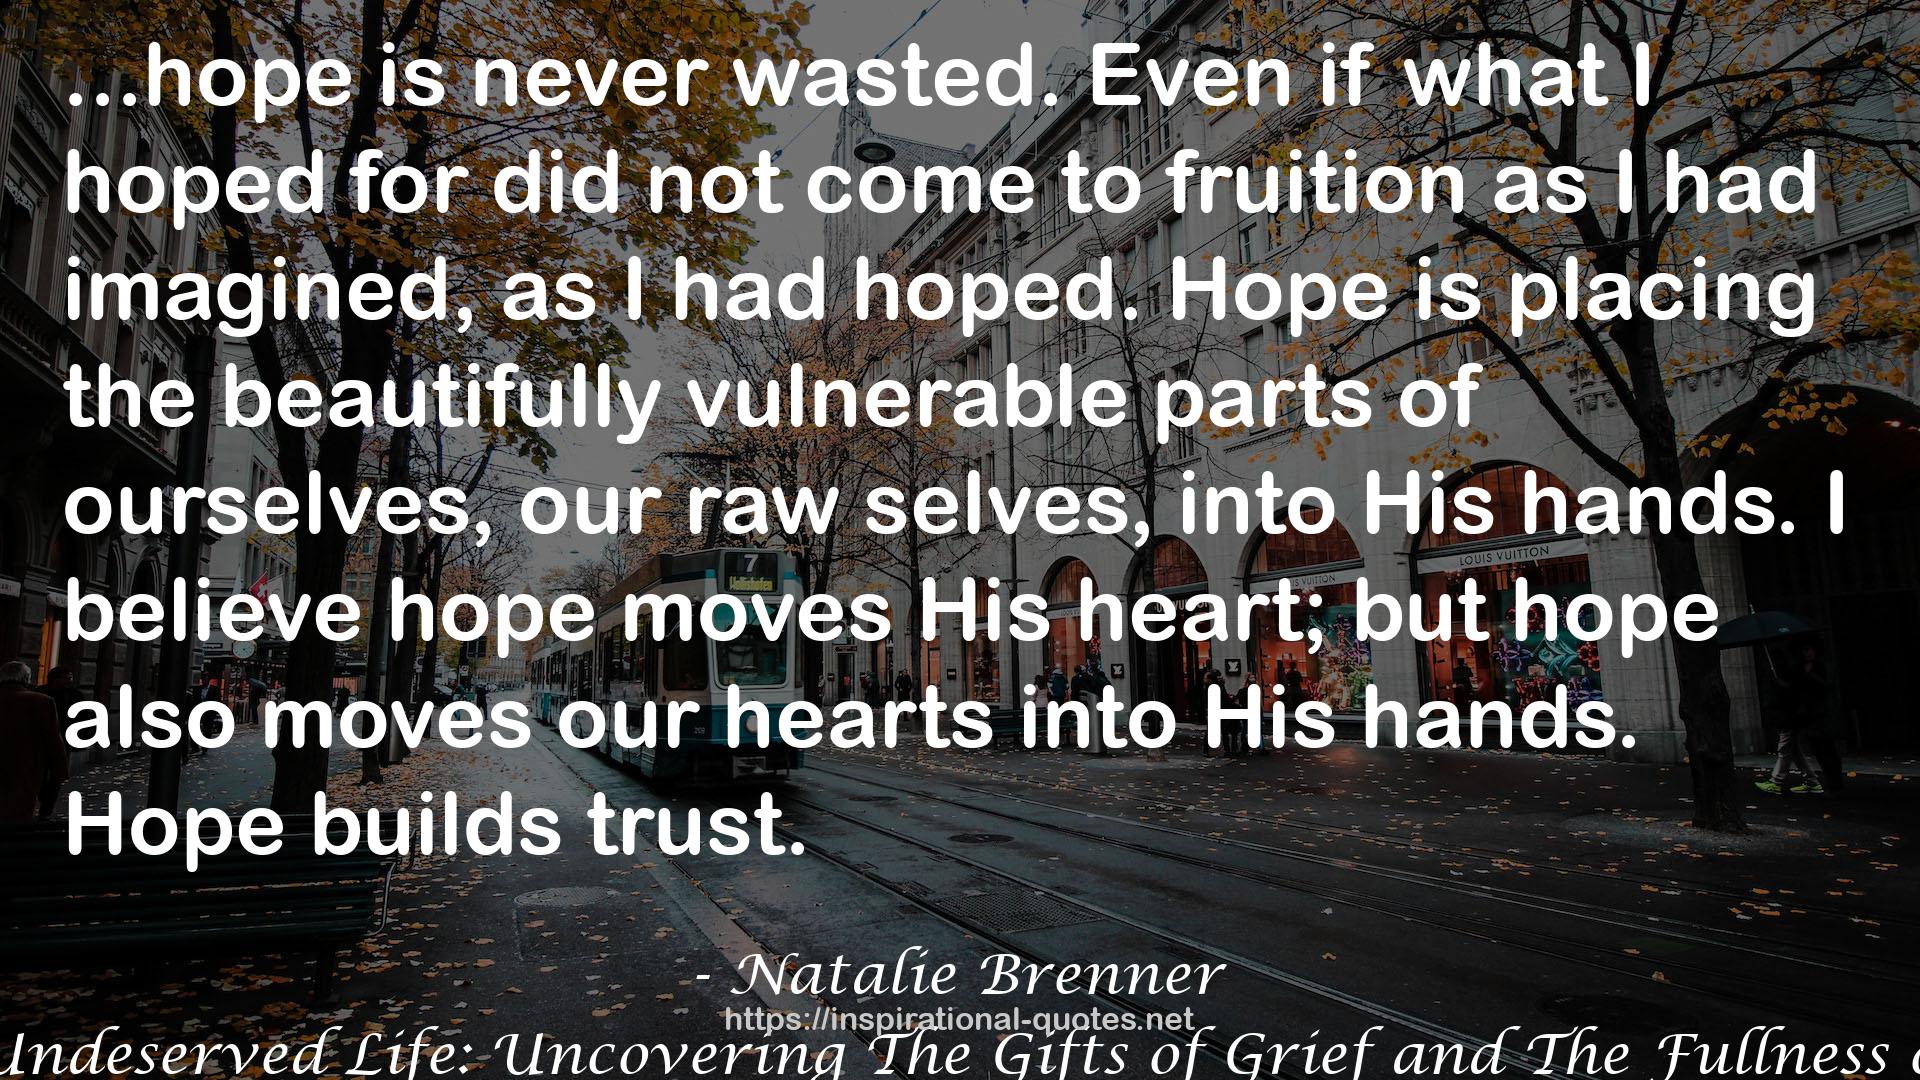 This Undeserved Life: Uncovering The Gifts of Grief and The Fullness of Life QUOTES